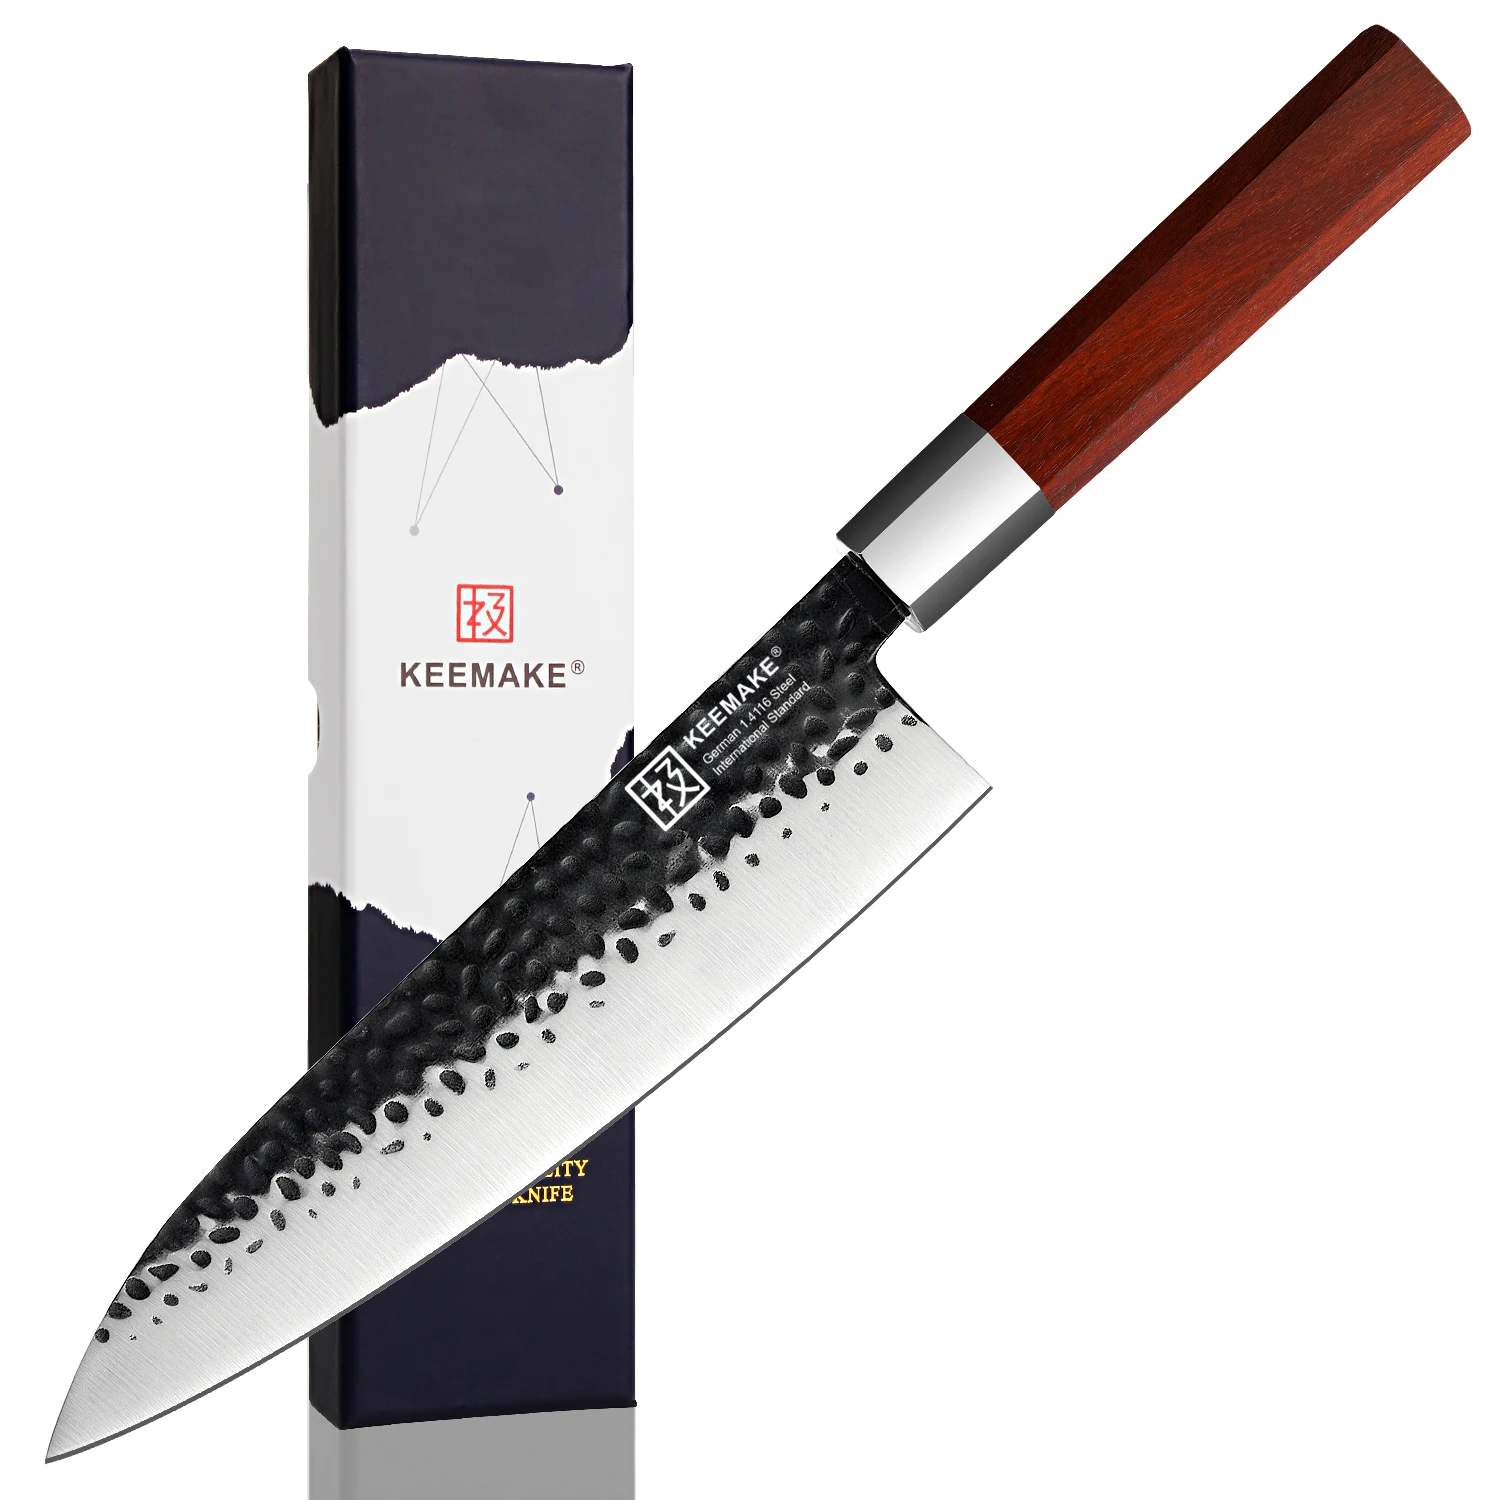 

KEEMAKE Chef Kitchen Knife Forged Stainless Steel 8'' INCH Japanese Gyuto Cooking Knife Wooden Handle Sushi Salmon Fish Fillet